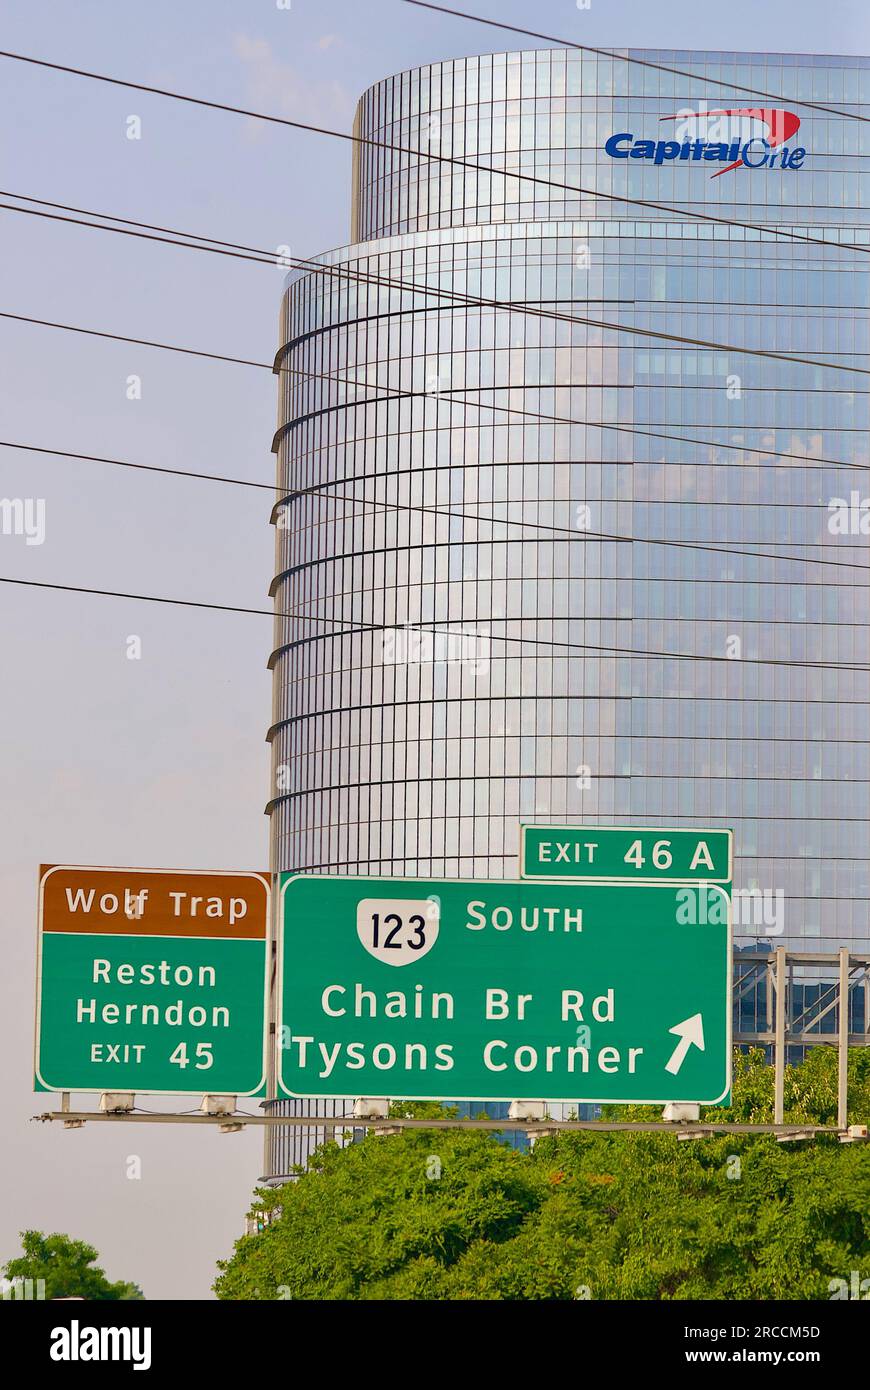 Tysons Corner, Virginia, USA - June 17, 2023: Signs on Interstate 495 show the exits for Wolf Trap and Route 123 near the Capital One building. Stock Photo